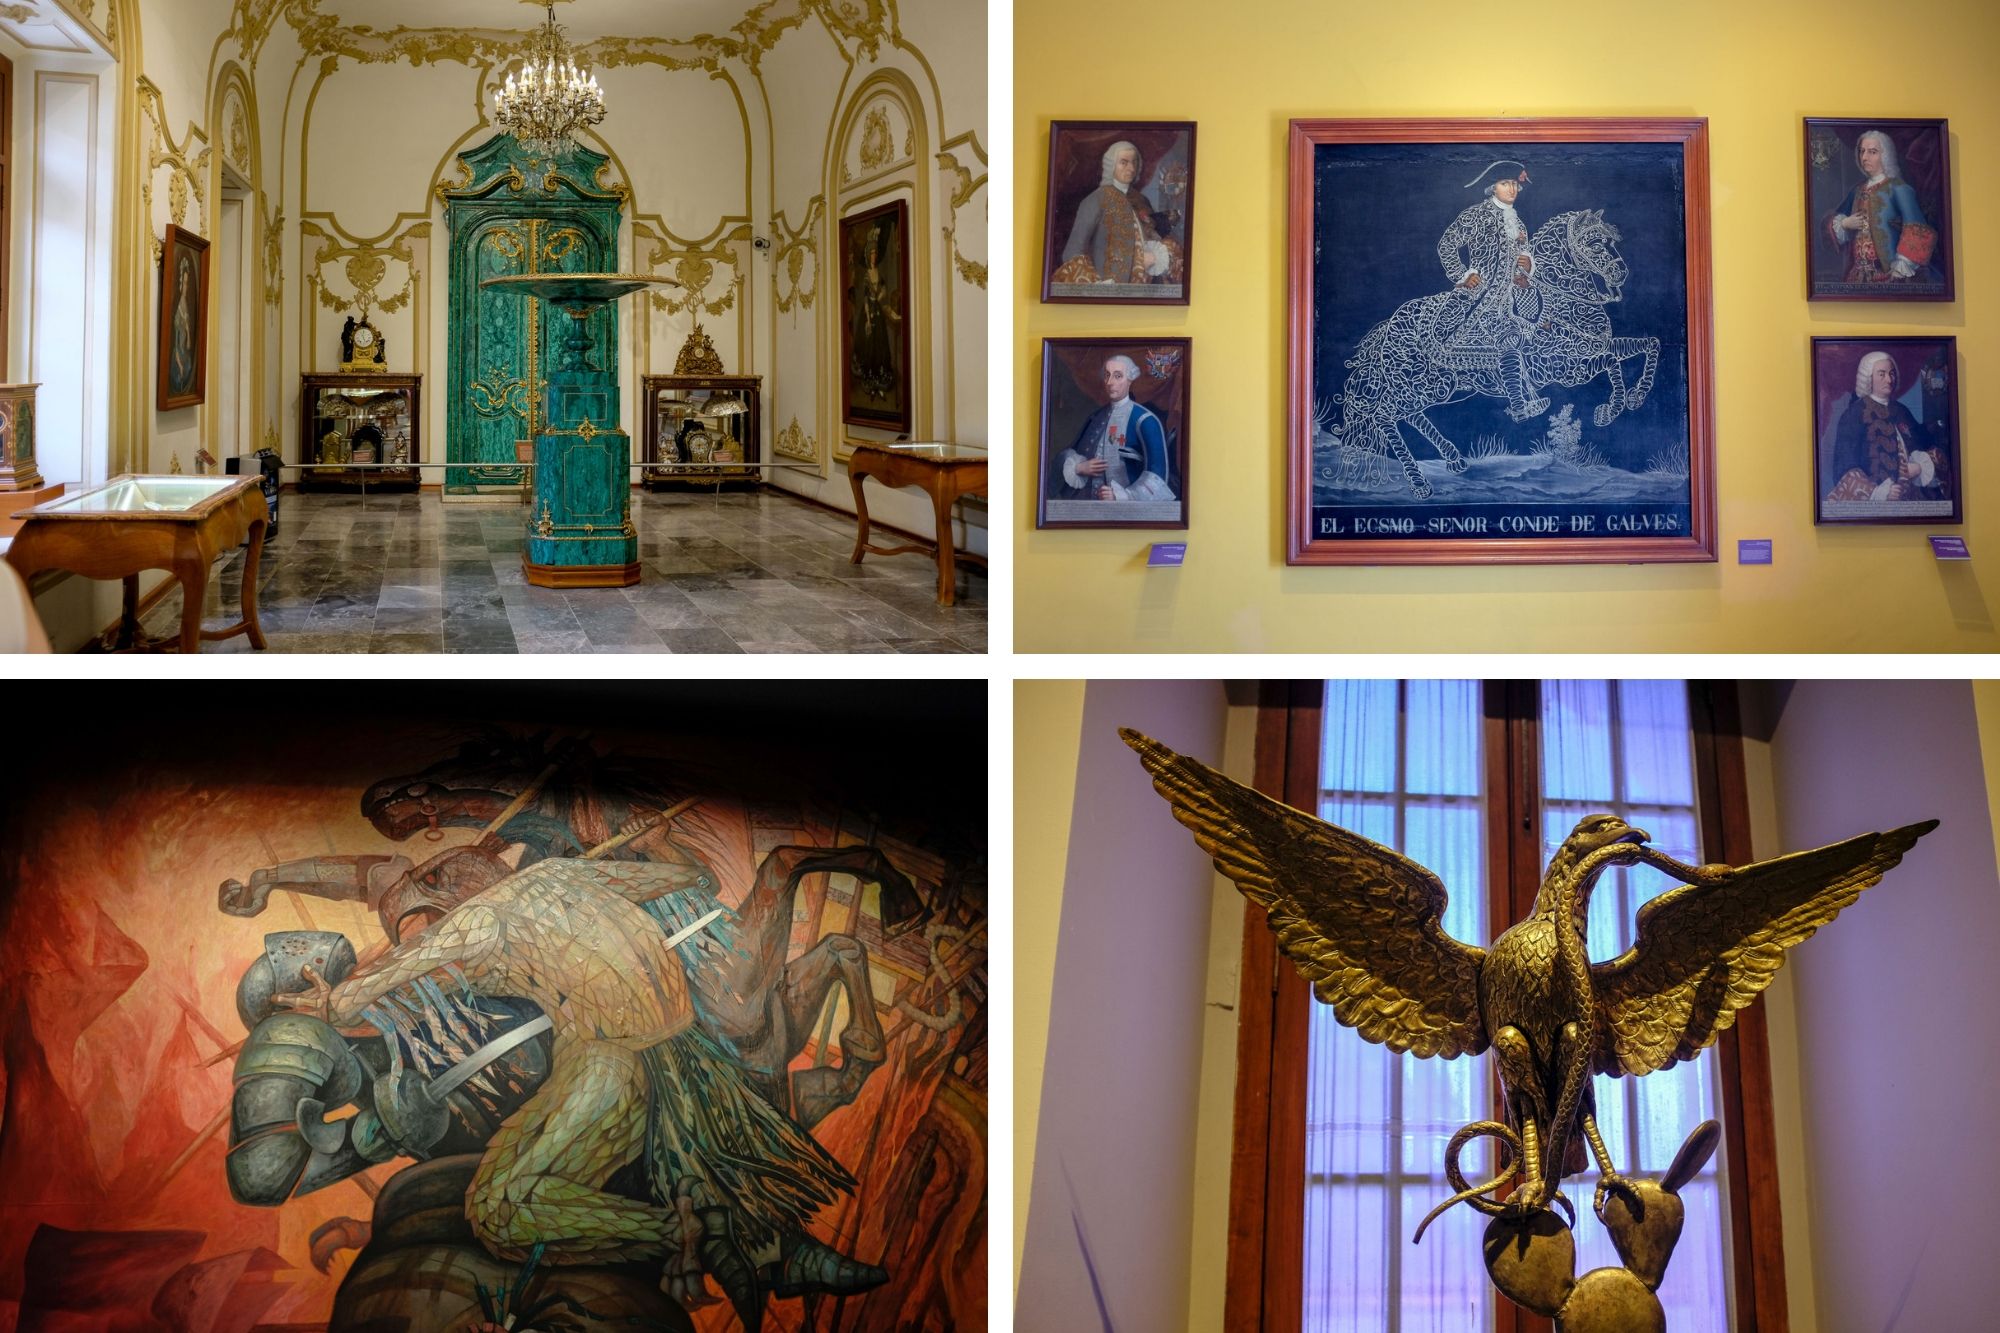 Collage: murals and interior of the castle in very ornate style